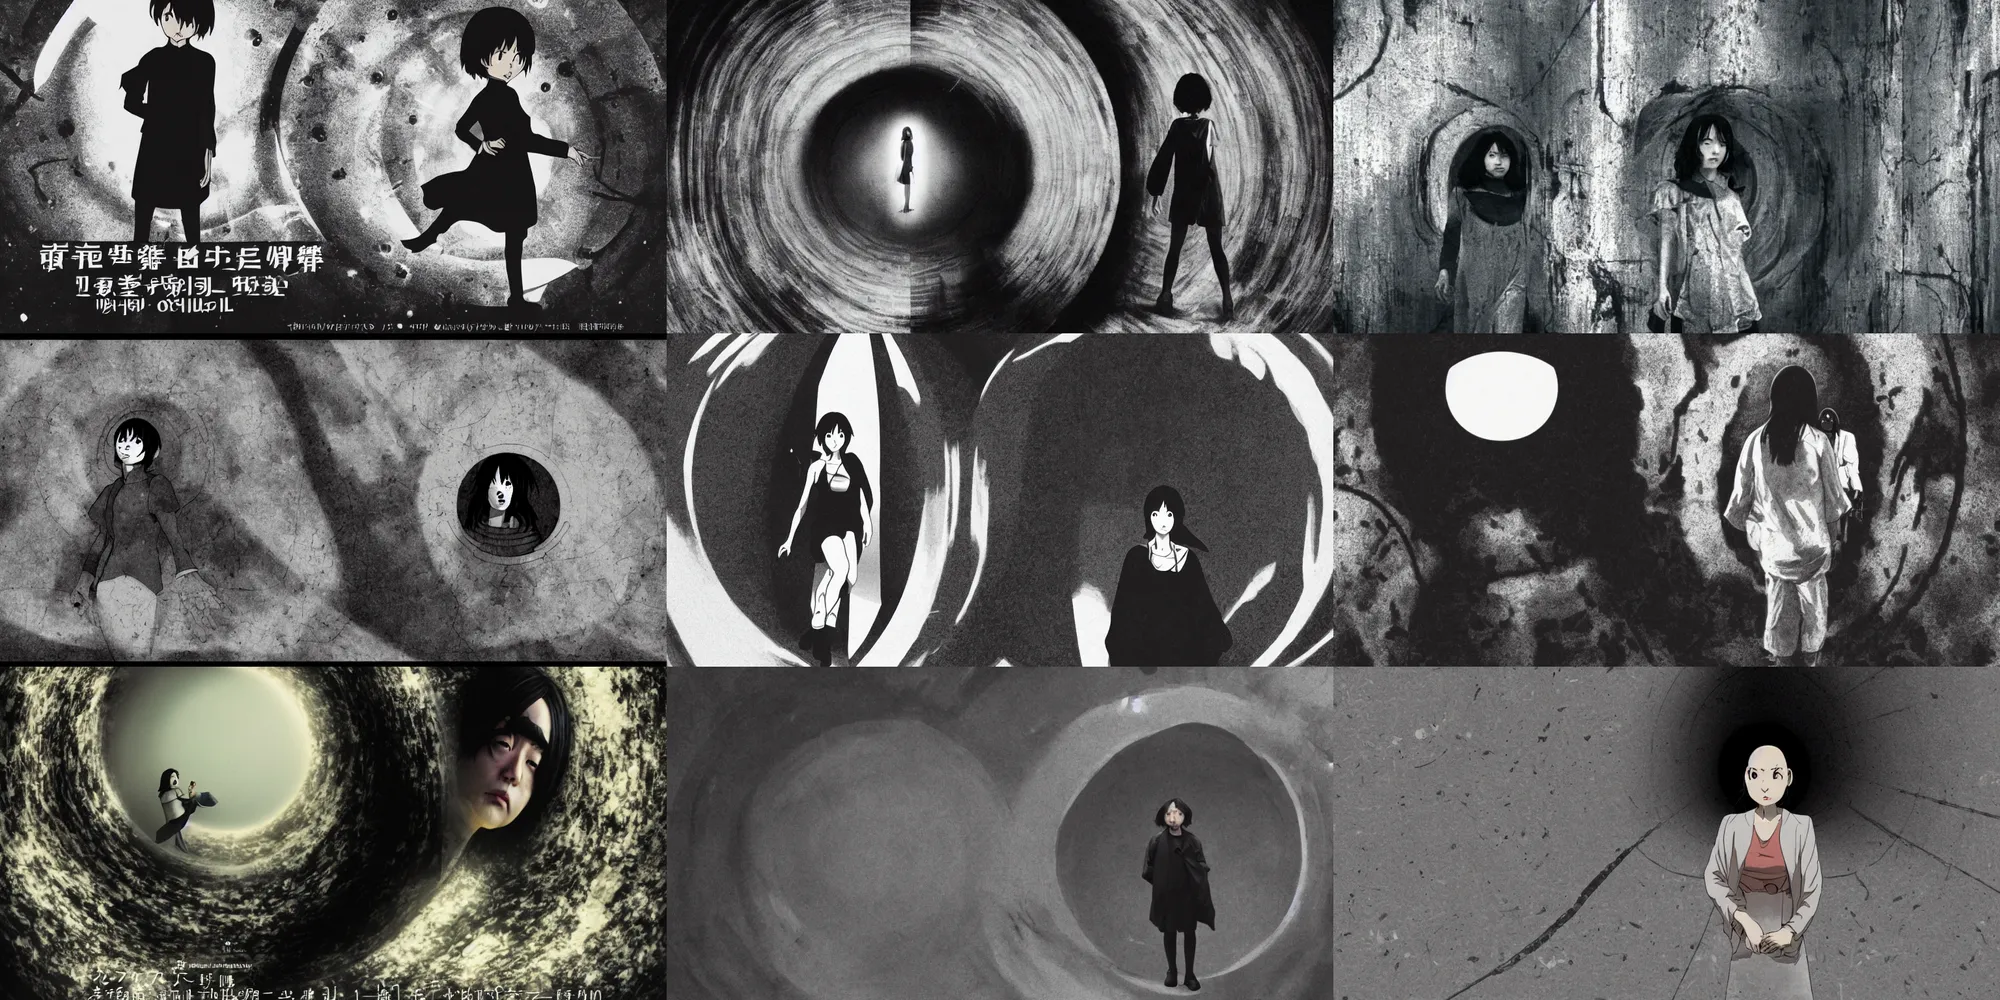 Prompt: mamoru oshii miyazaki movie poster, ultra wide, brutalist, girl outside a large vanta black hole in the side of a concrete wall, entrance to a dark tunnel, black circle, black round hole, black depths